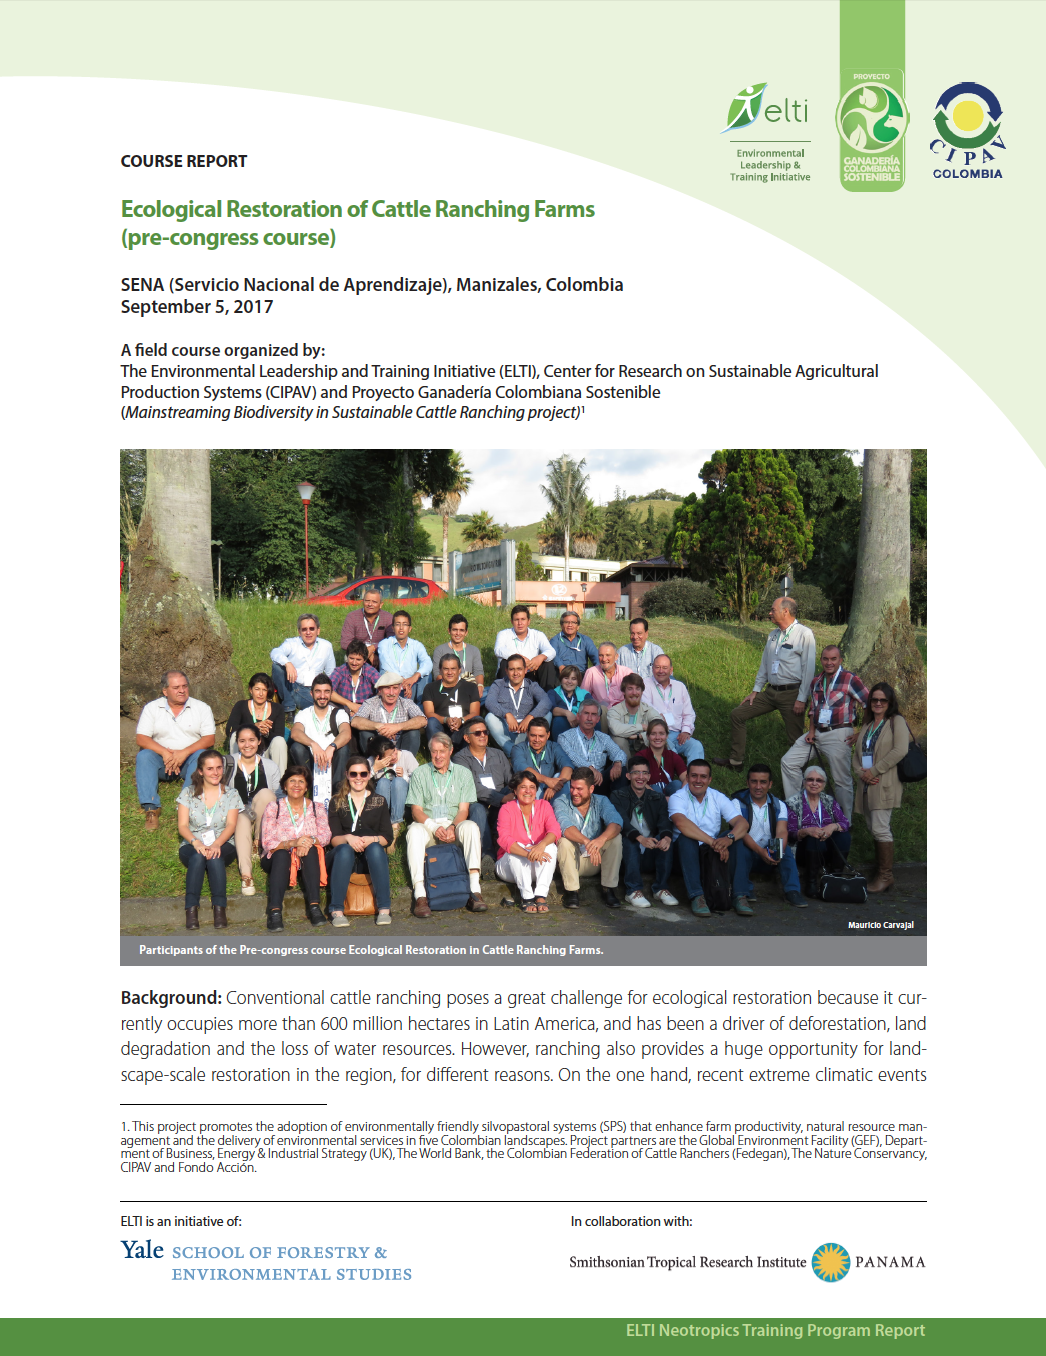 III International Course on Agroecology and Ecological Restoration: Resilience to Climate Change